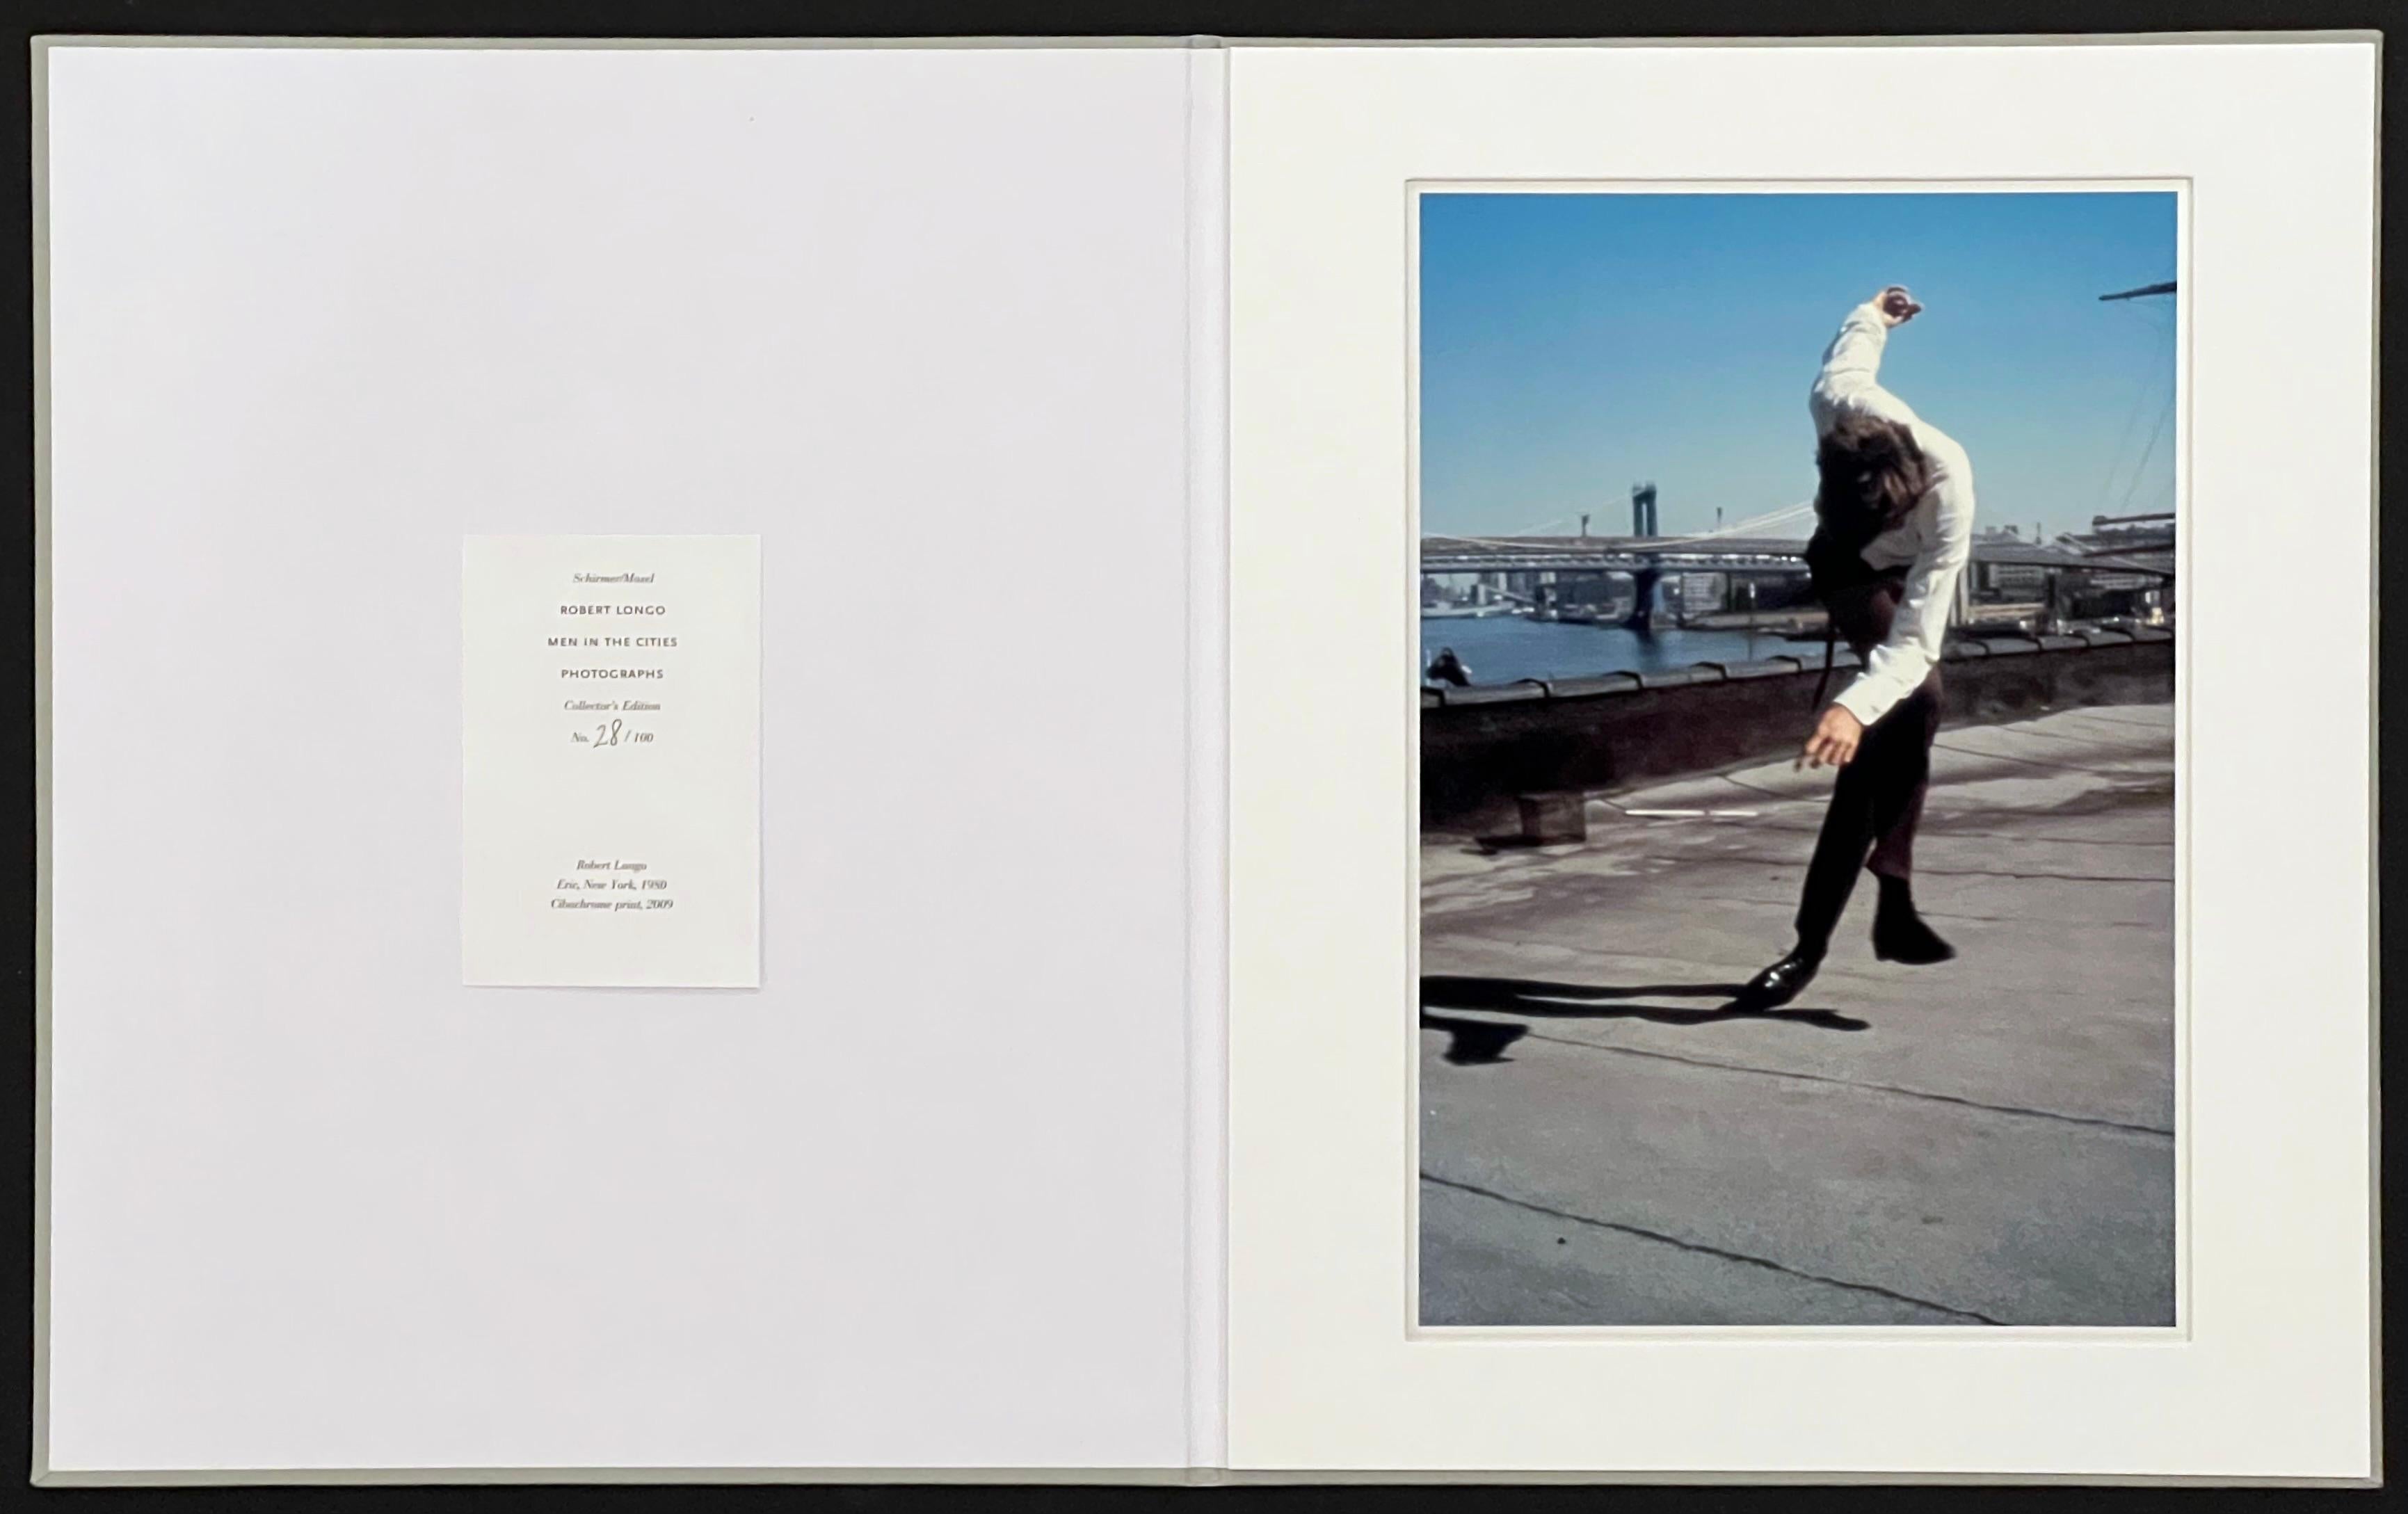 Dancer, actor, musician and model, Eric Barsness was 24 years old when Robert Longo created this image for his infamous, Men in the Cities portfolio.  A highly original color chromogenic print, this artwork is hand-signed in black felt tip pen, and